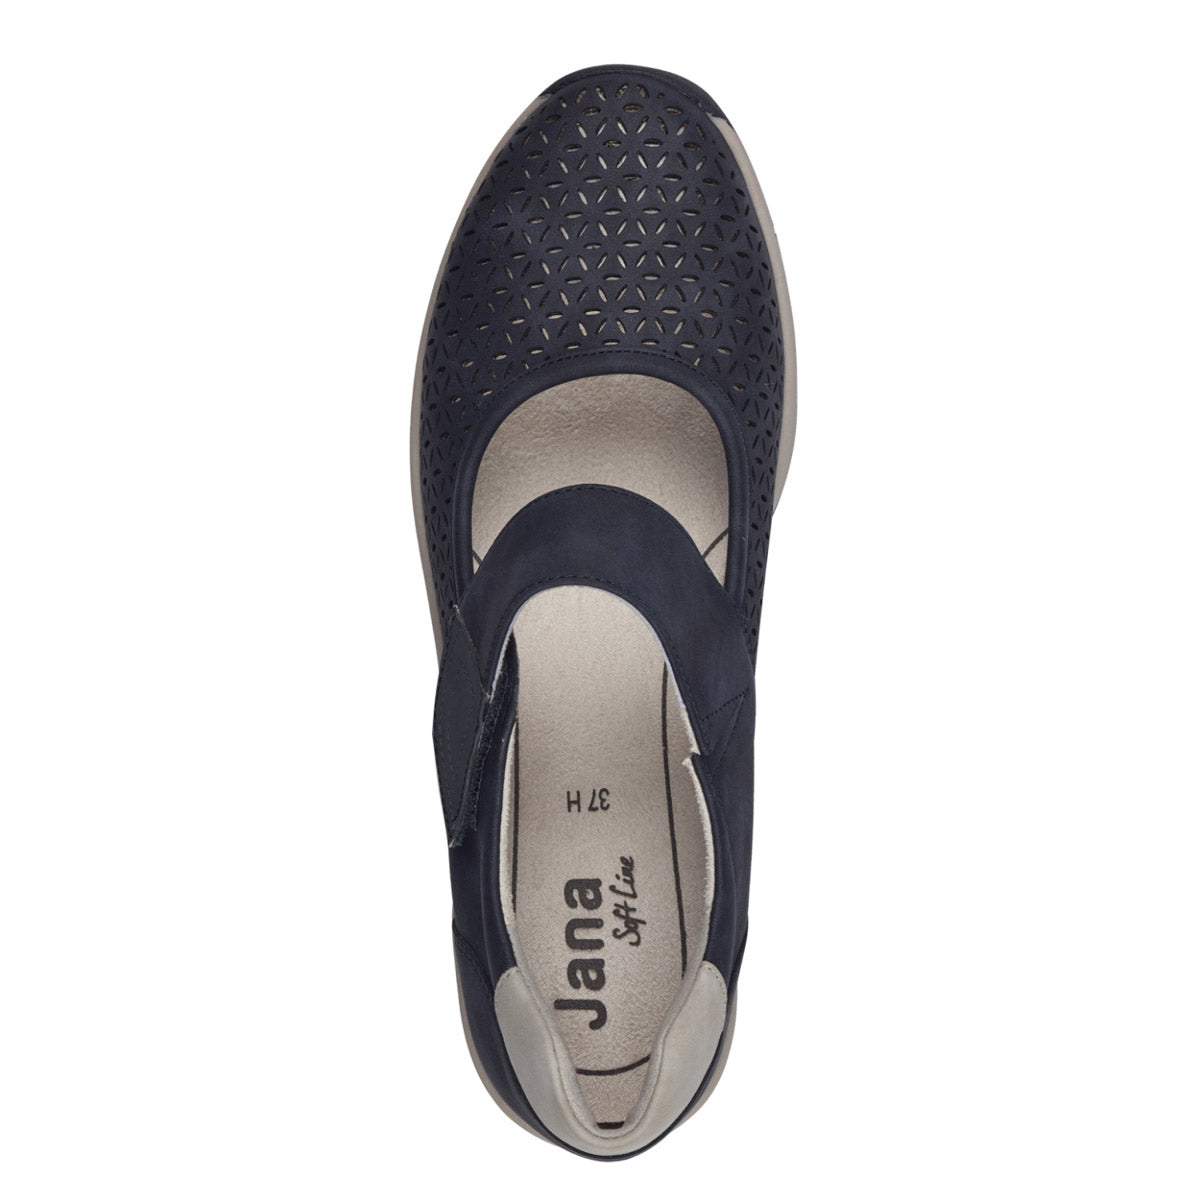 Top view of the navy shoe with rounded toe and beige detail.